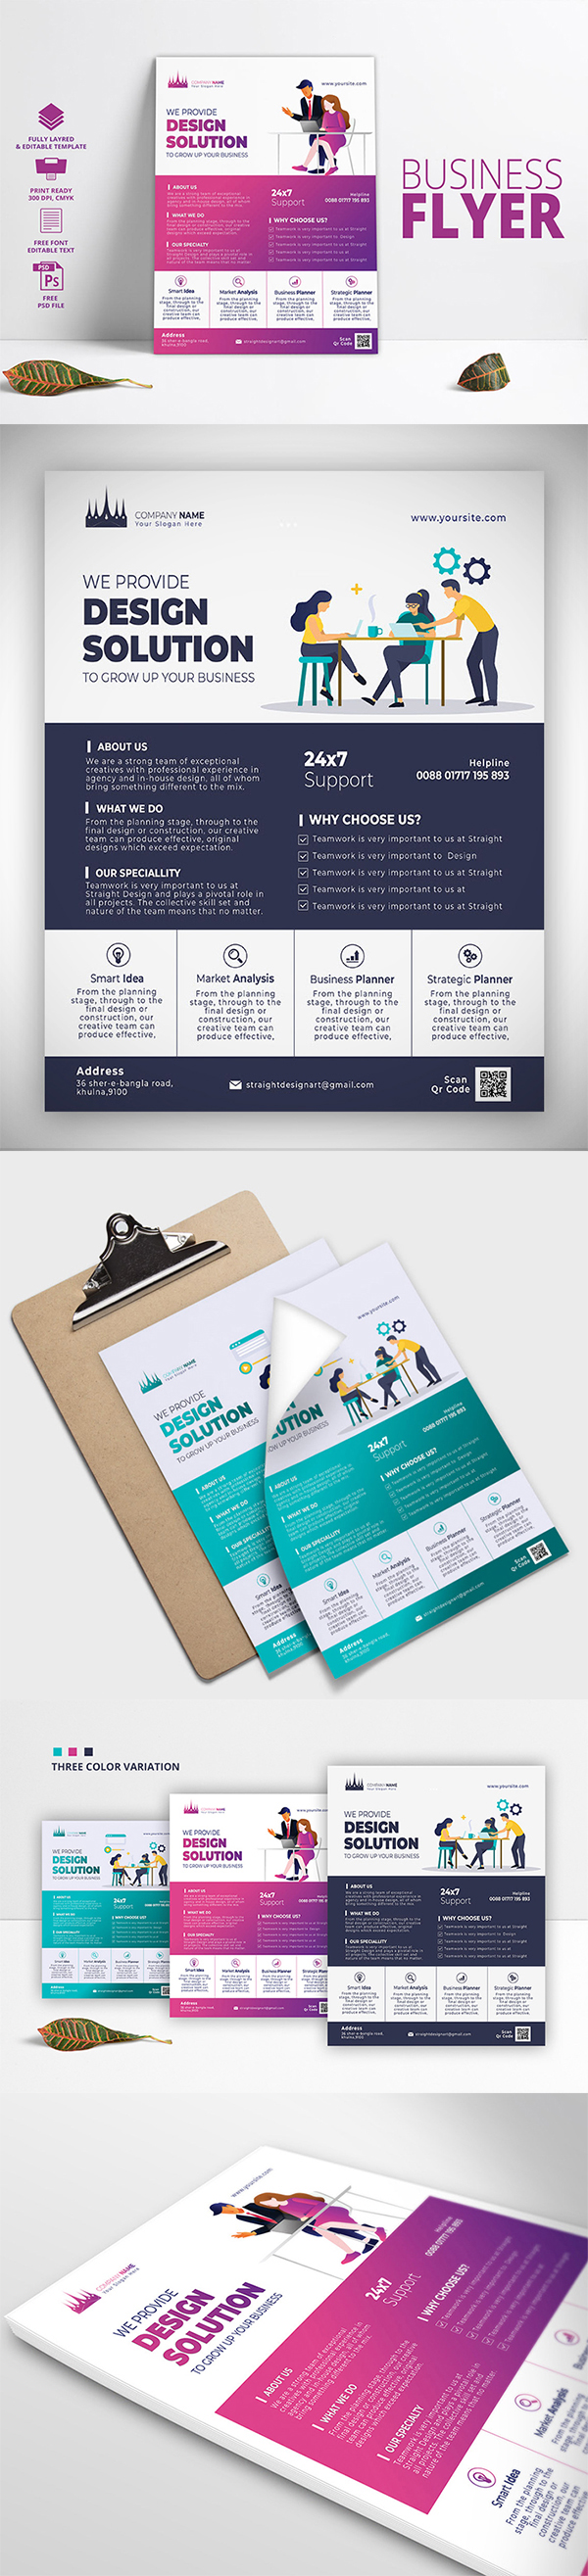 Free Download Corporate Print Ready Business PSD Flyer Template